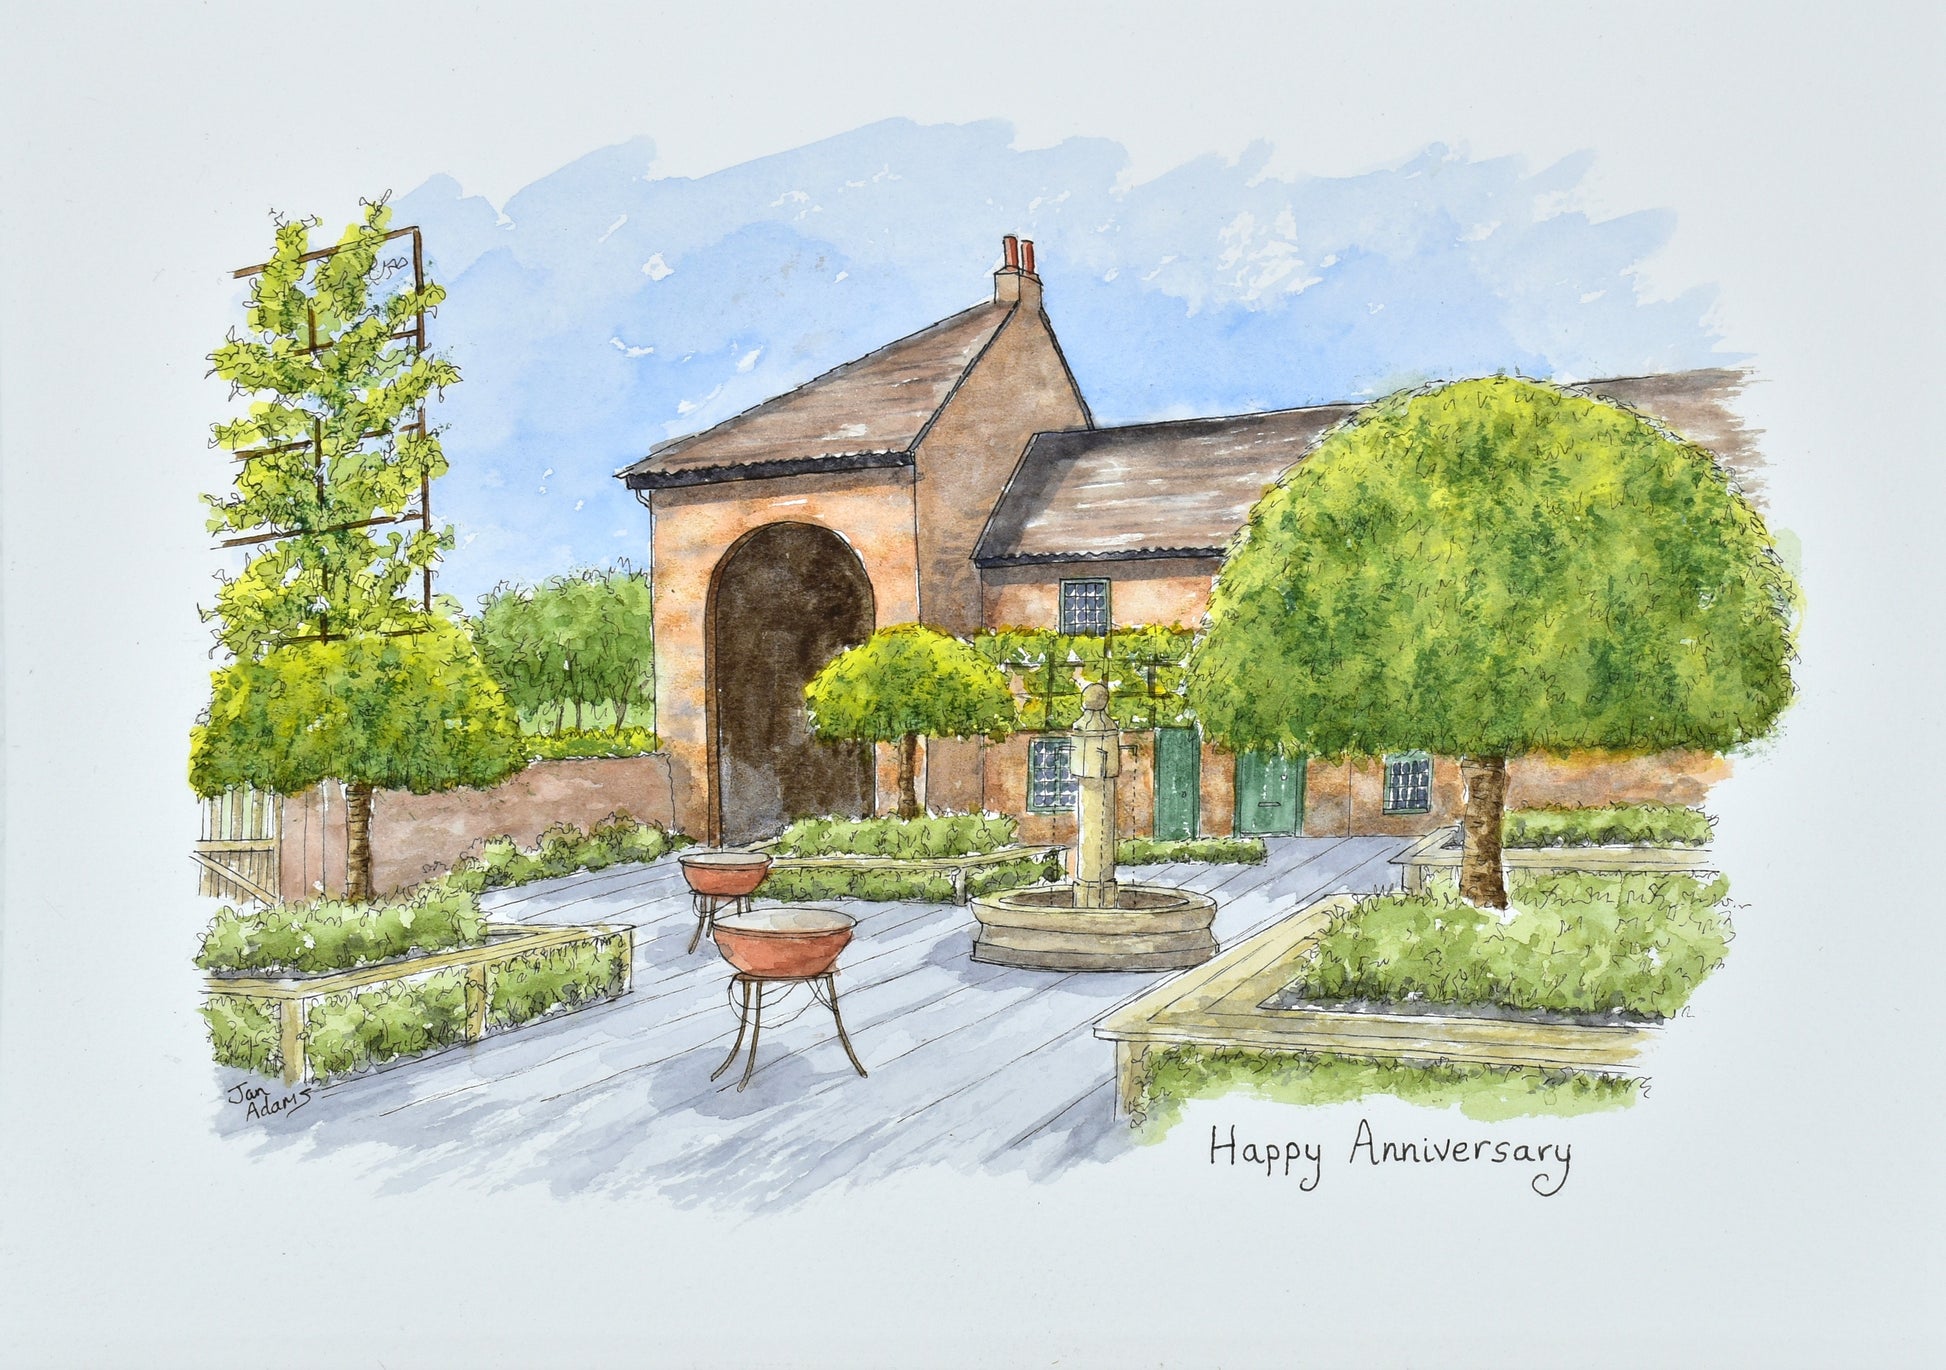 Hazel Gap Barn courtyard with barbeques